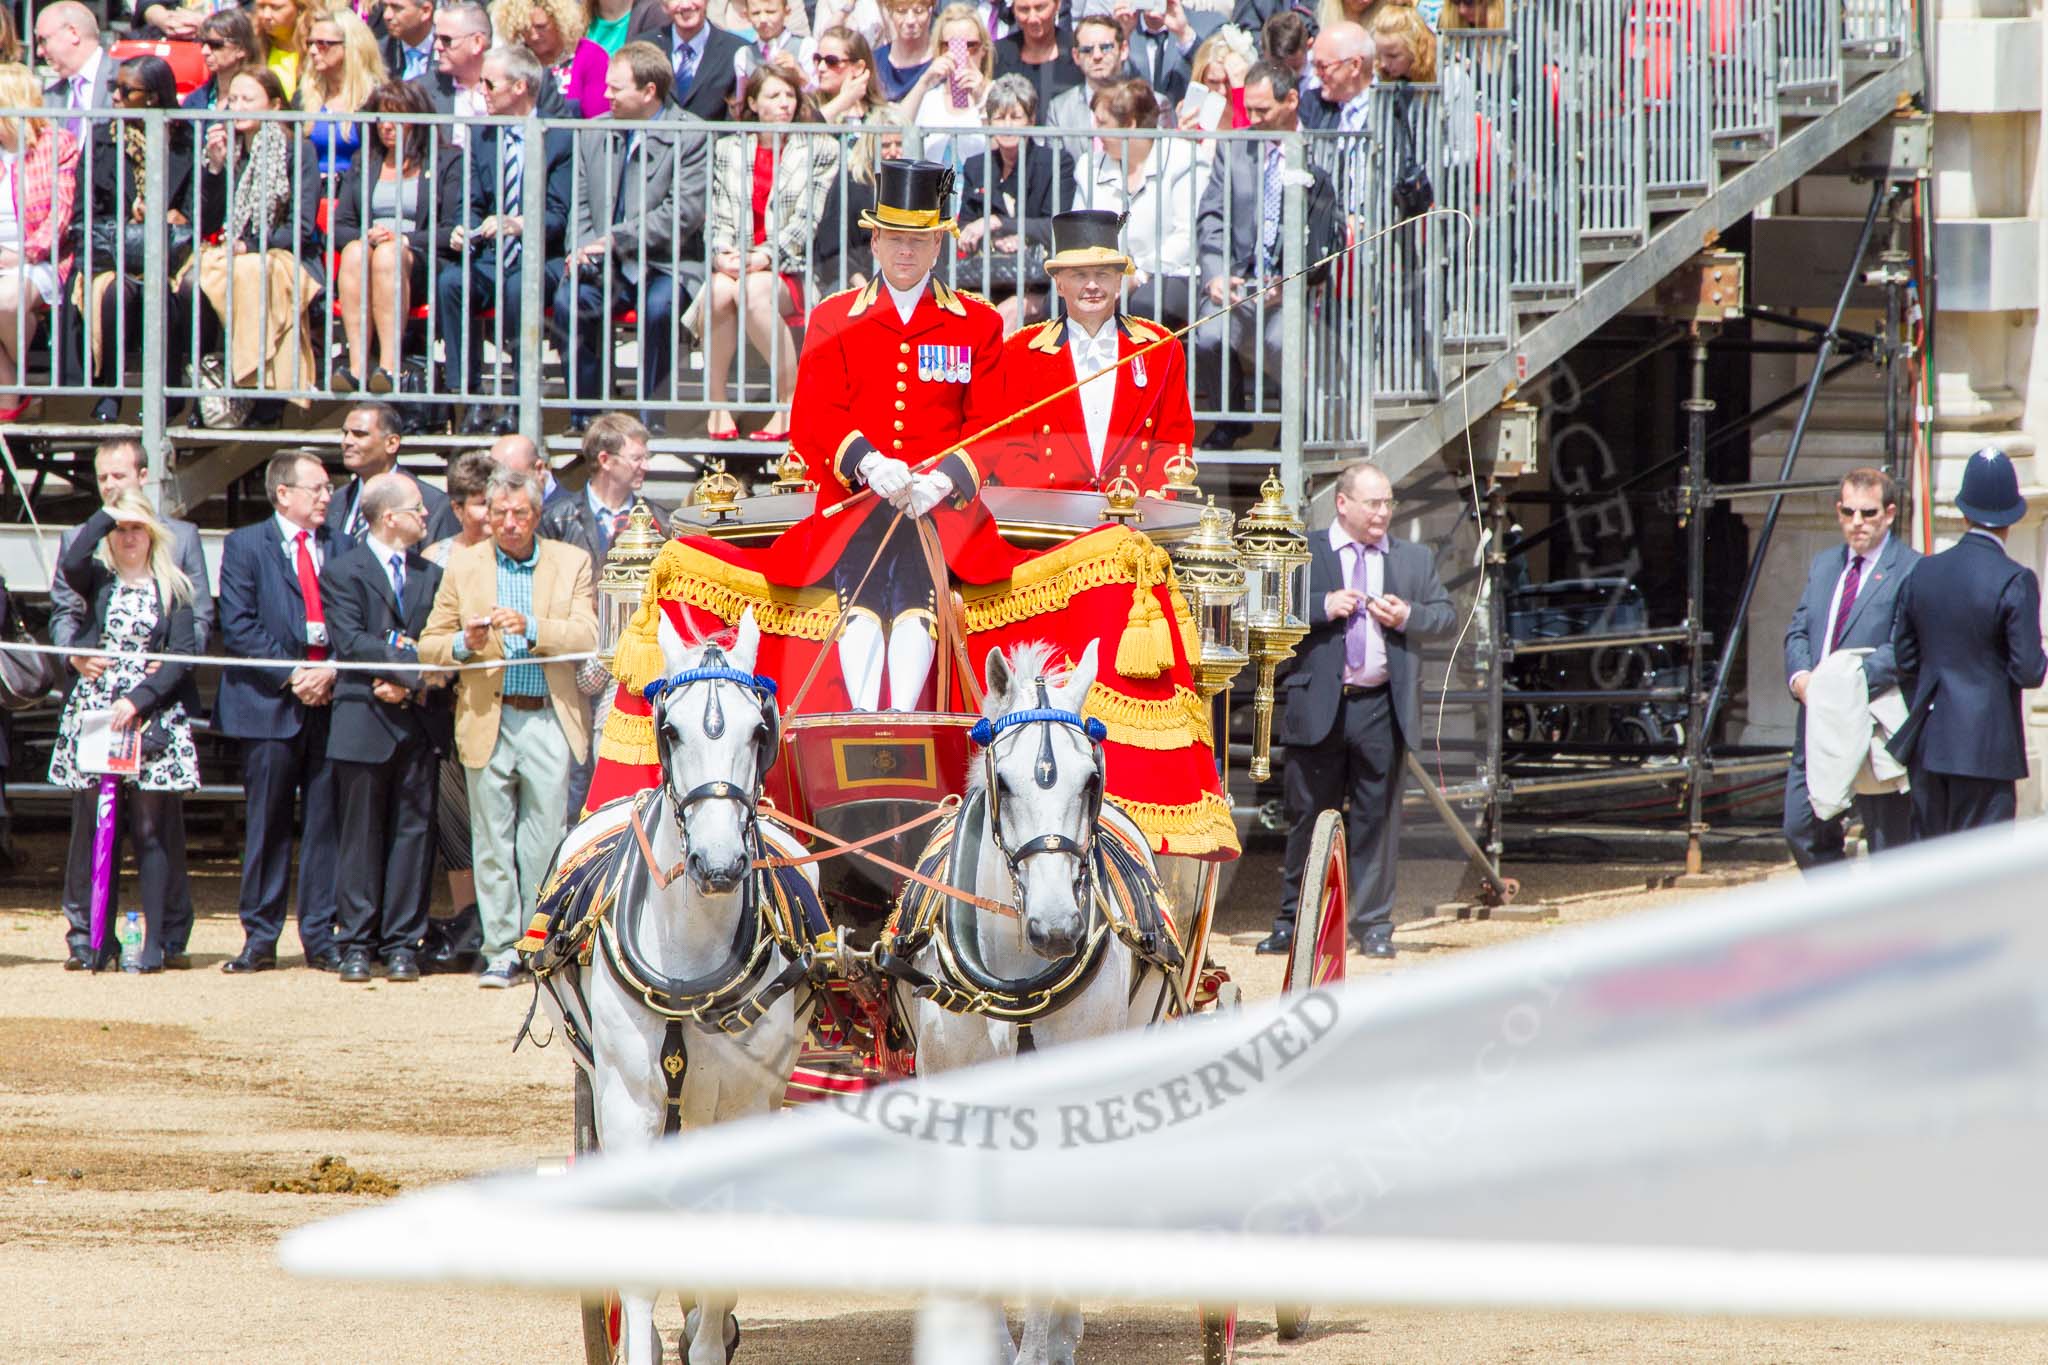 Trooping the Colour 2013: The Glass Coach is brought back onto Horse Guards Parade to take HM The Queen and HRH The Duke of Kent back to Buckingham Paace. Image #796, 15 June 2013 12:08 Horse Guards Parade, London, UK